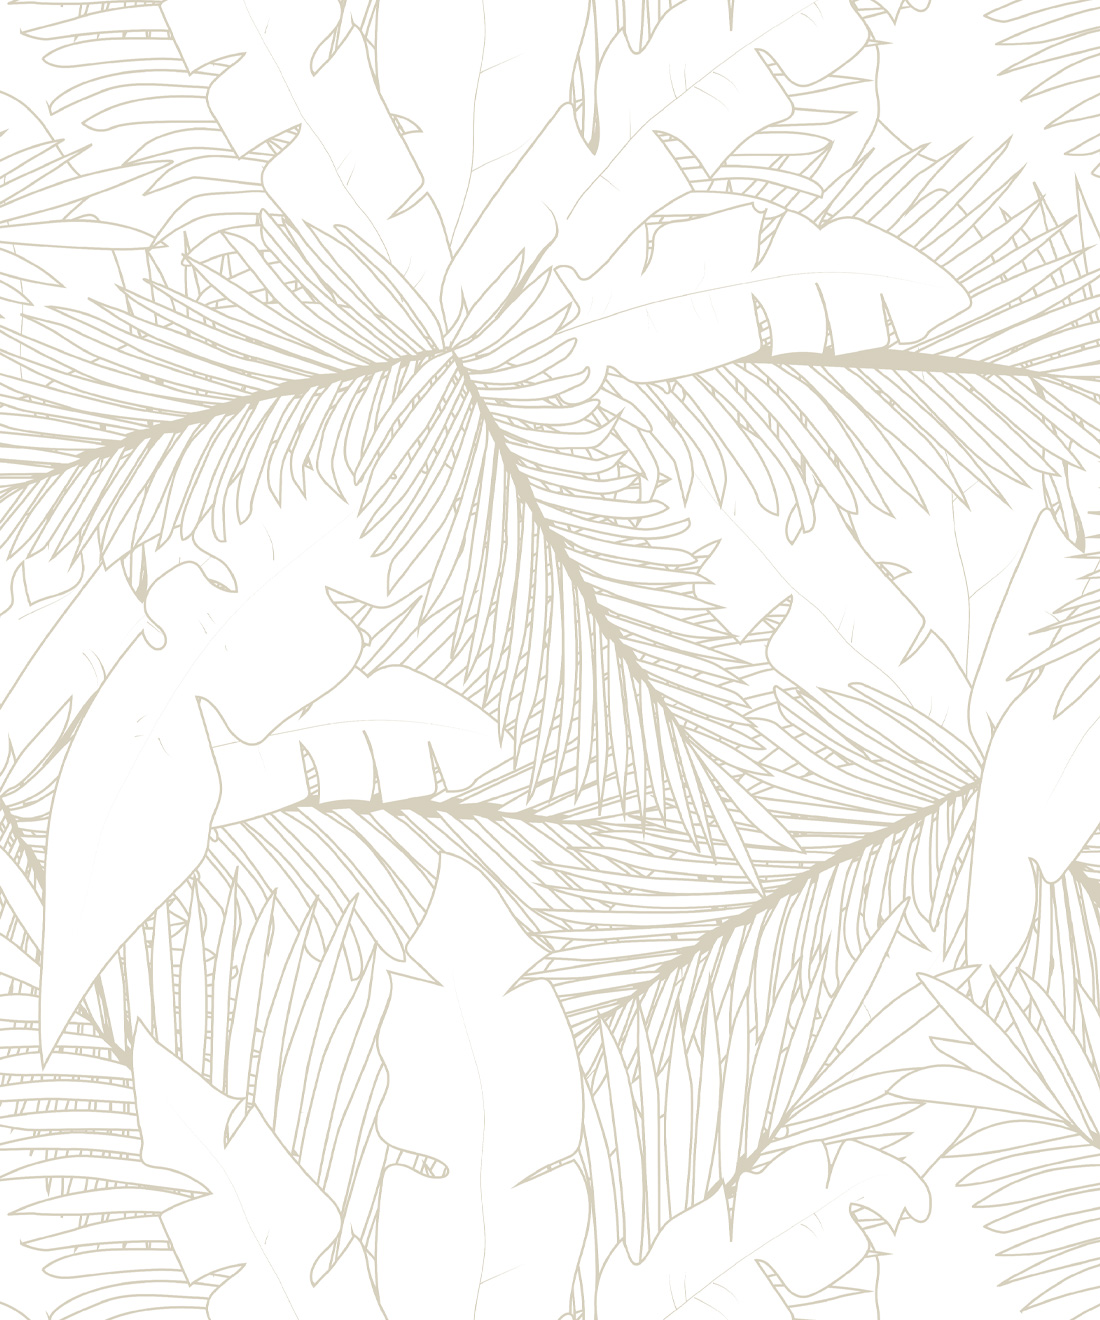 Black and white leaves drawing leaves wallpaper - TenStickers